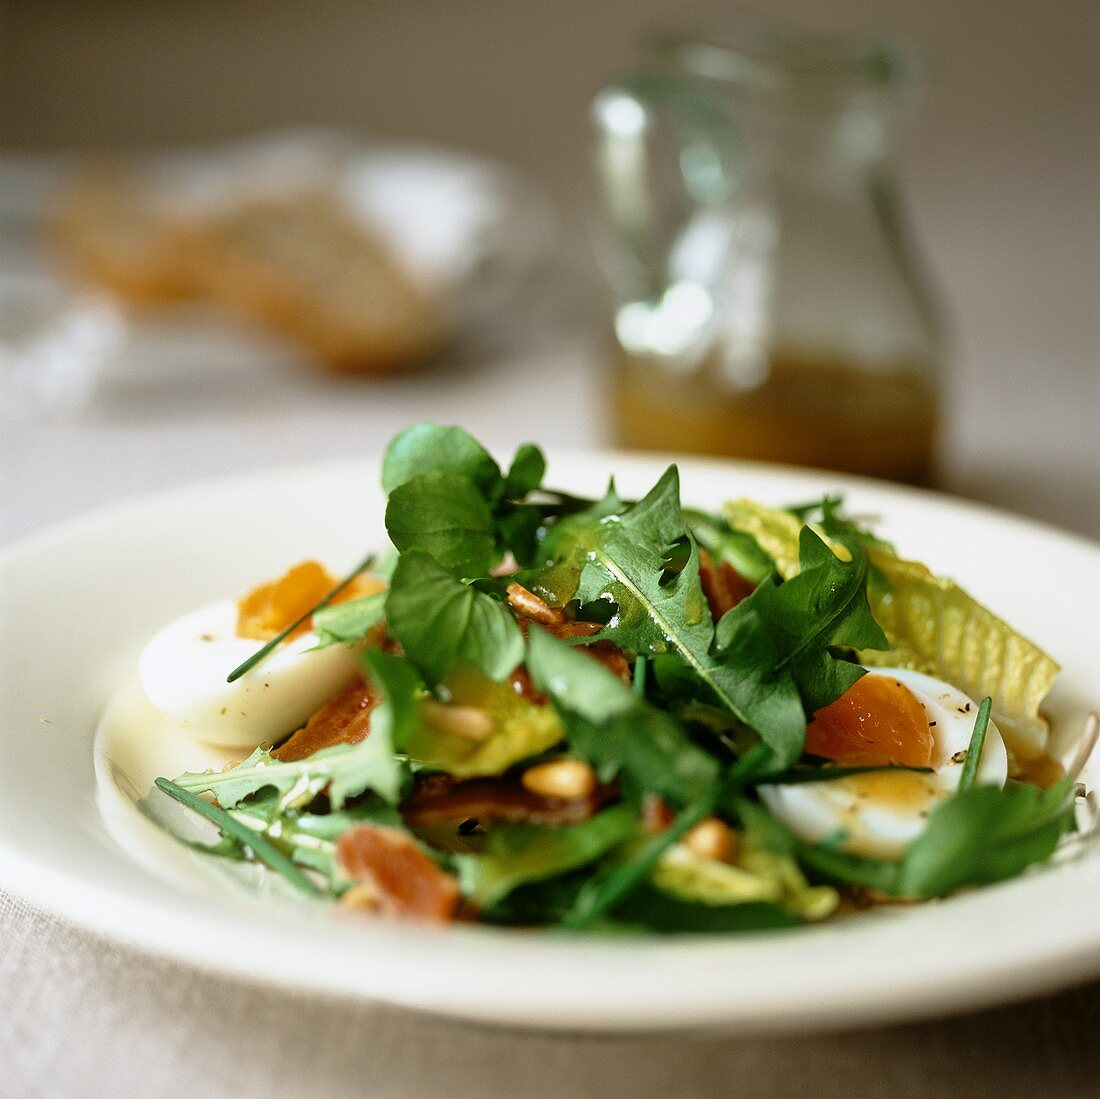 Dandelion salad with water cress, ham and egg